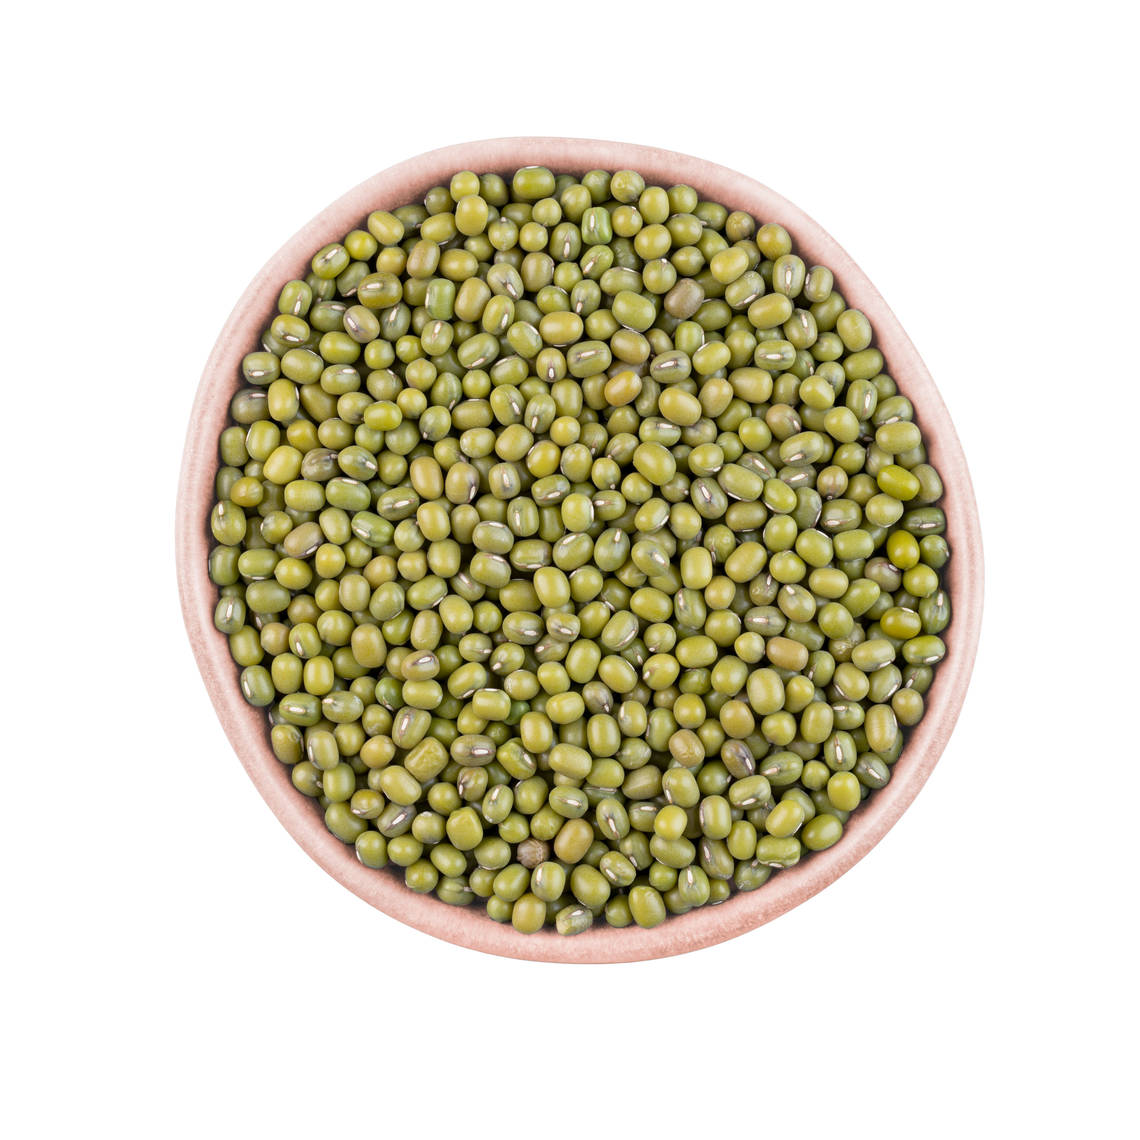 Mung beans, also referred to as moong beans or green grams or golden grams, are round shaped green beans, light-yellow on the inside.